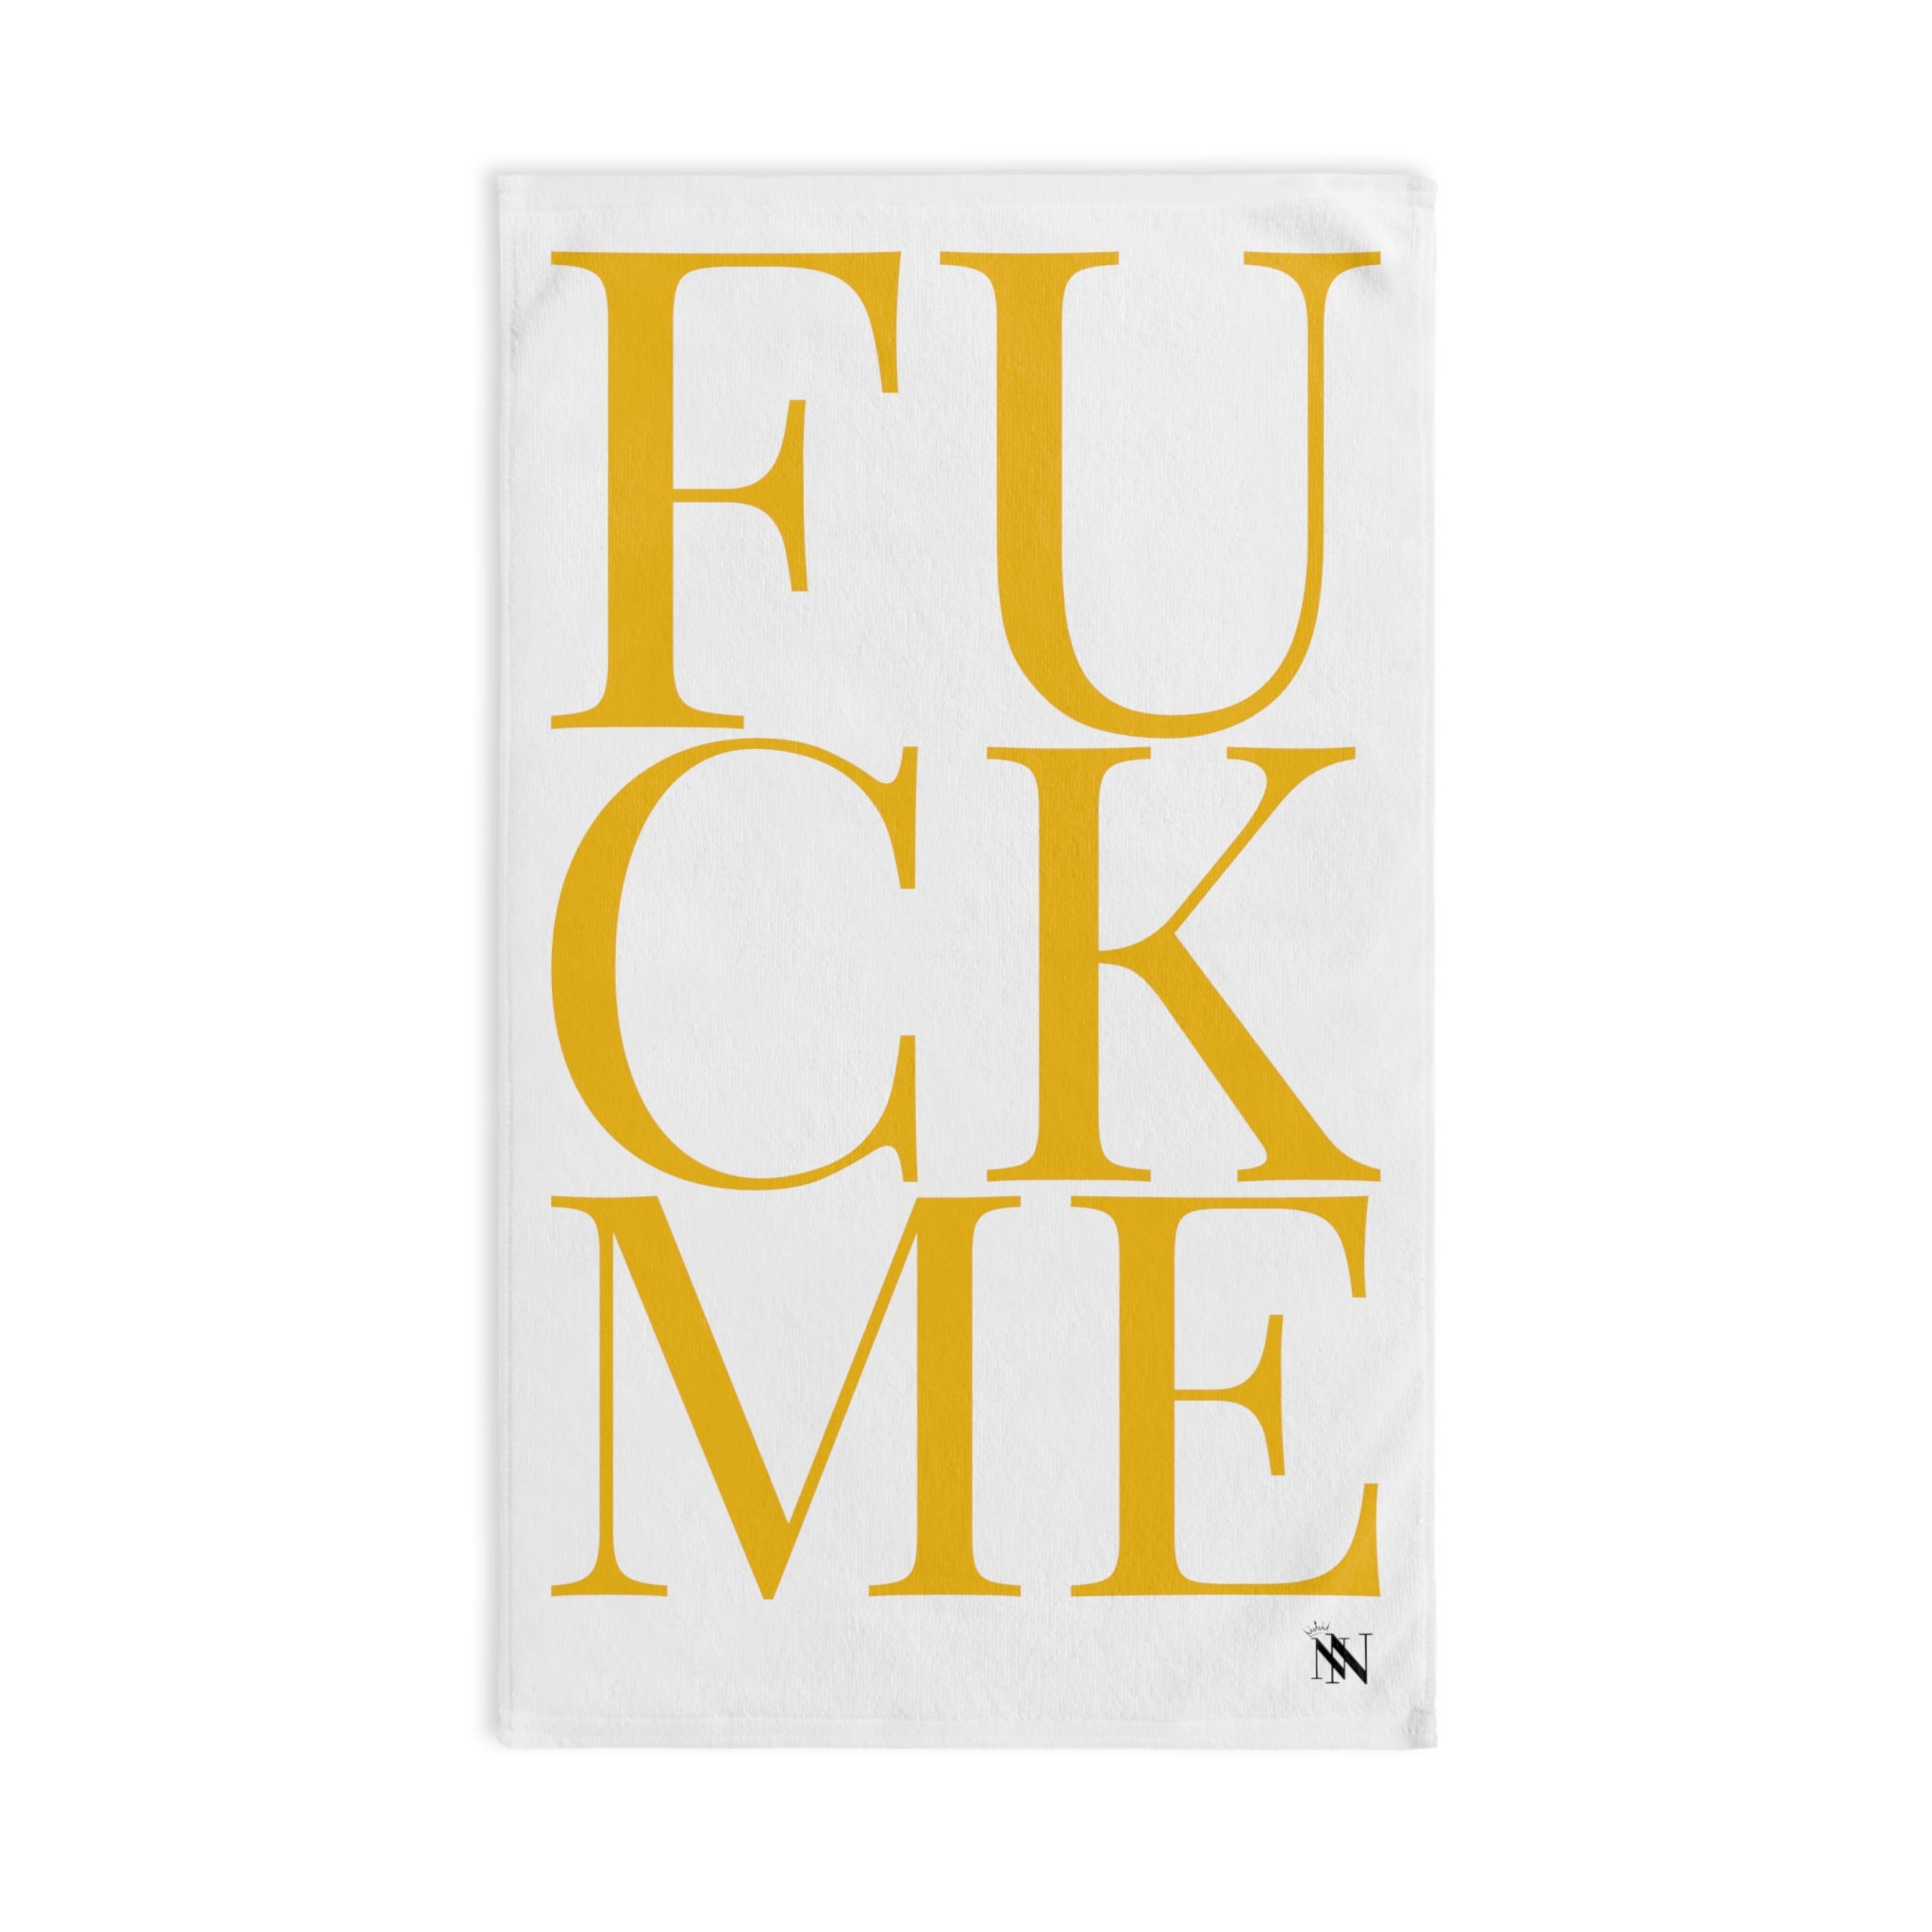 Me F*ck Block YellowWhite | Funny Gifts for Men - Gifts for Him - Birthday Gifts for Men, Him, Her, Husband, Boyfriend, Girlfriend, New Couple Gifts, Fathers & Valentines Day Gifts, Christmas Gifts NECTAR NAPKINS